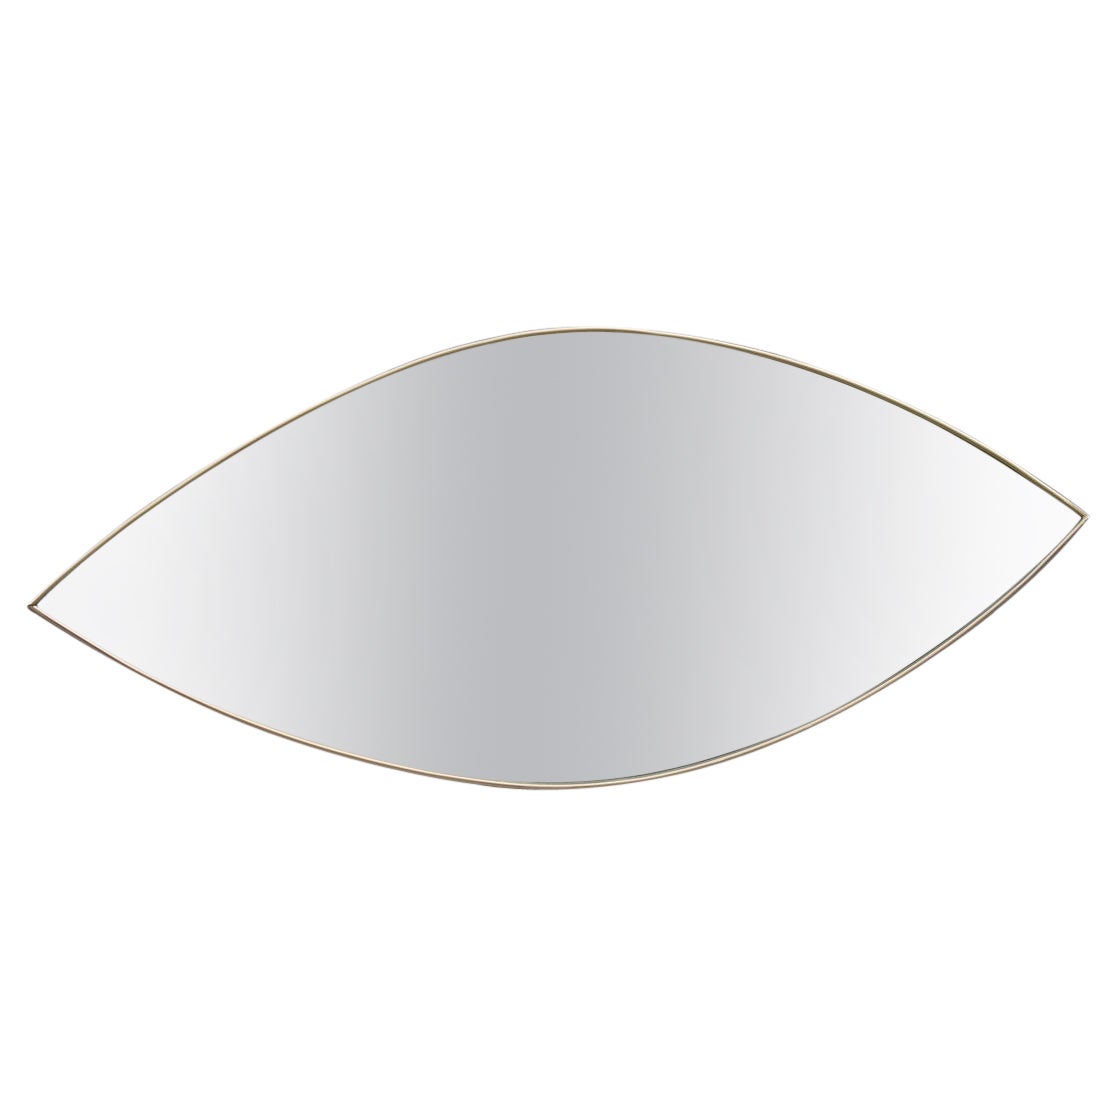 Particular Midcentury Italian Eye Shaped Mirror in Shaped Brass 1950s For Sale